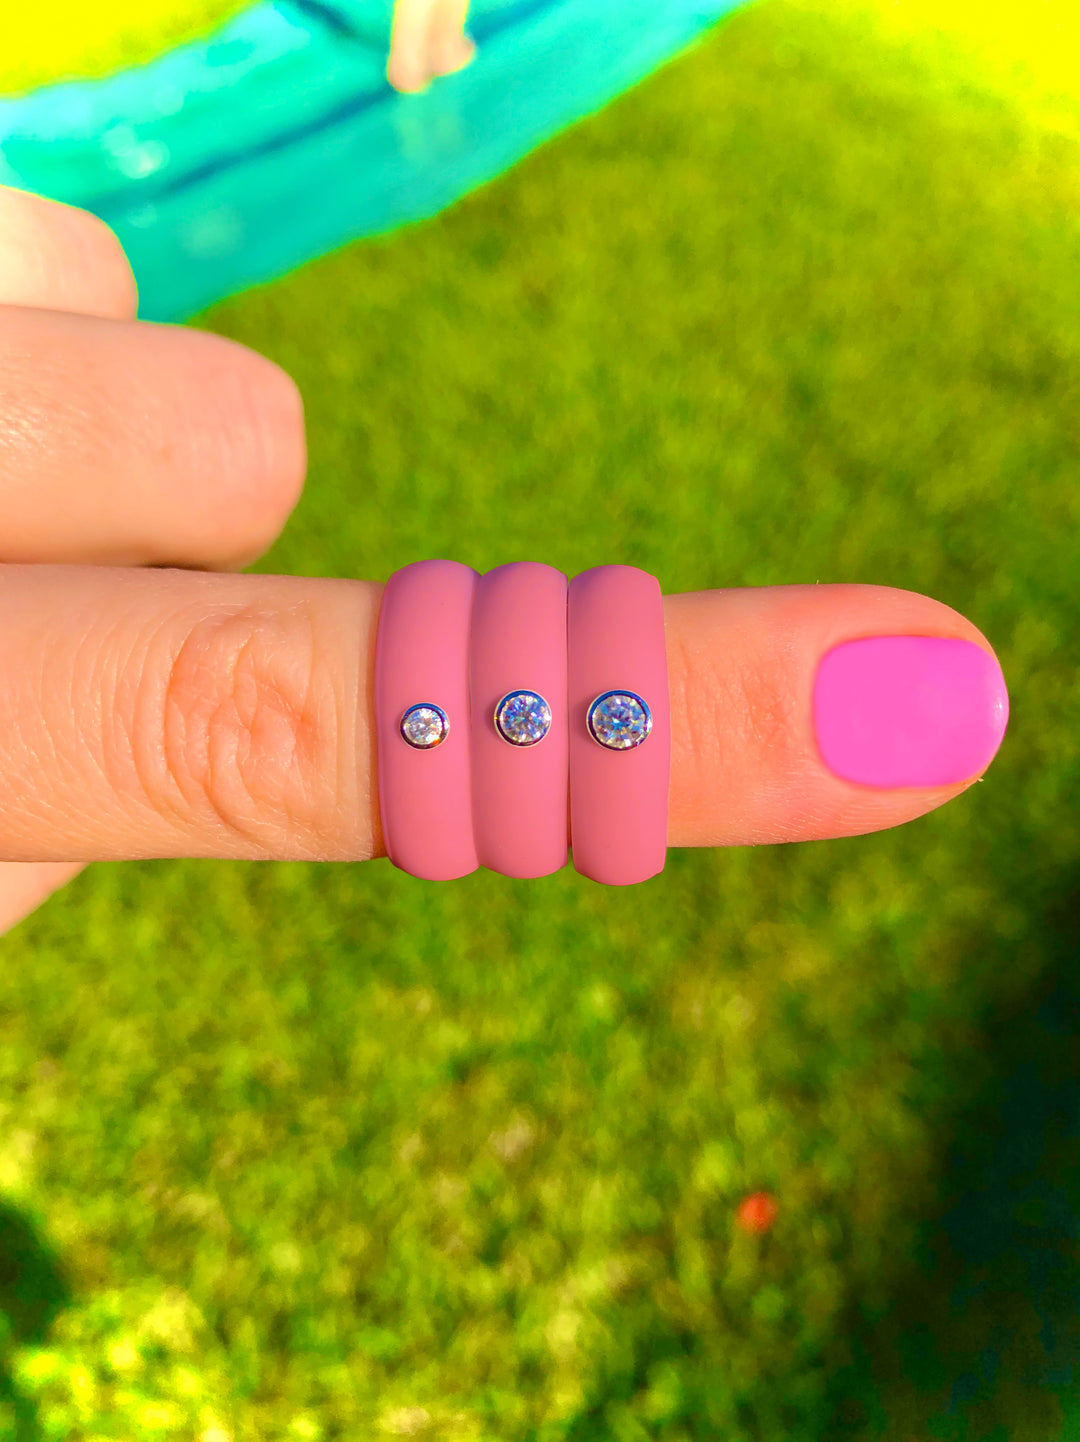 Hot Pink Diamond Silicone Ring